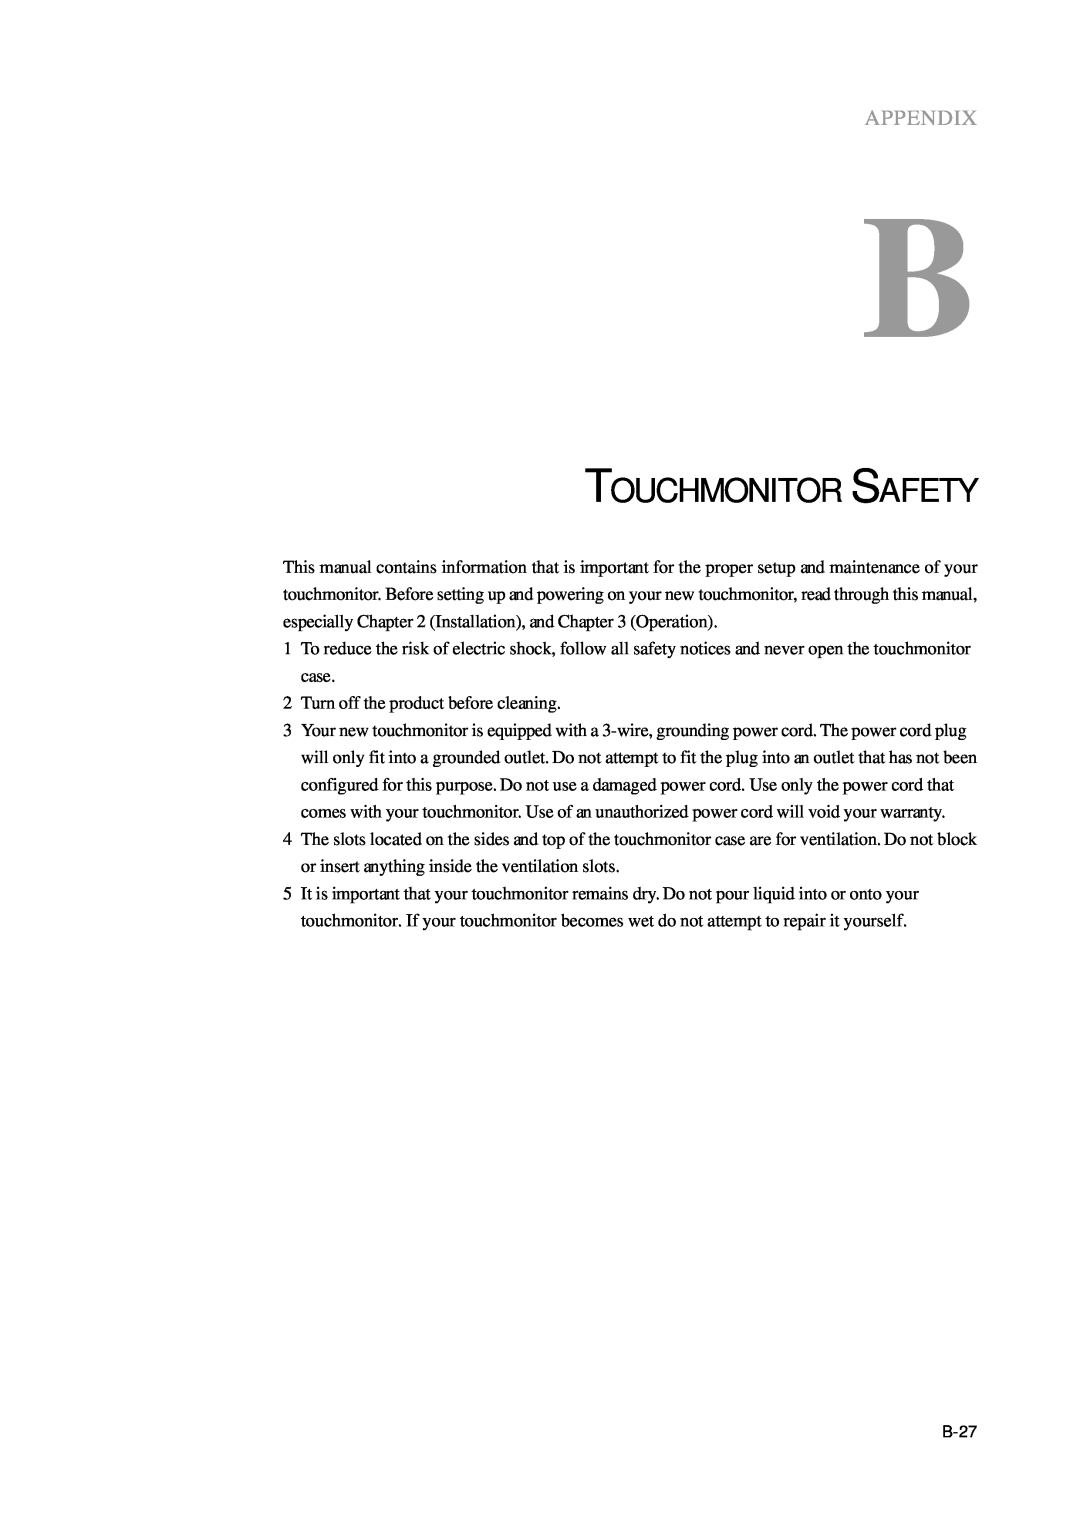 Elo TouchSystems 1000 Series manual Touchmonitor Safety, Appendix 